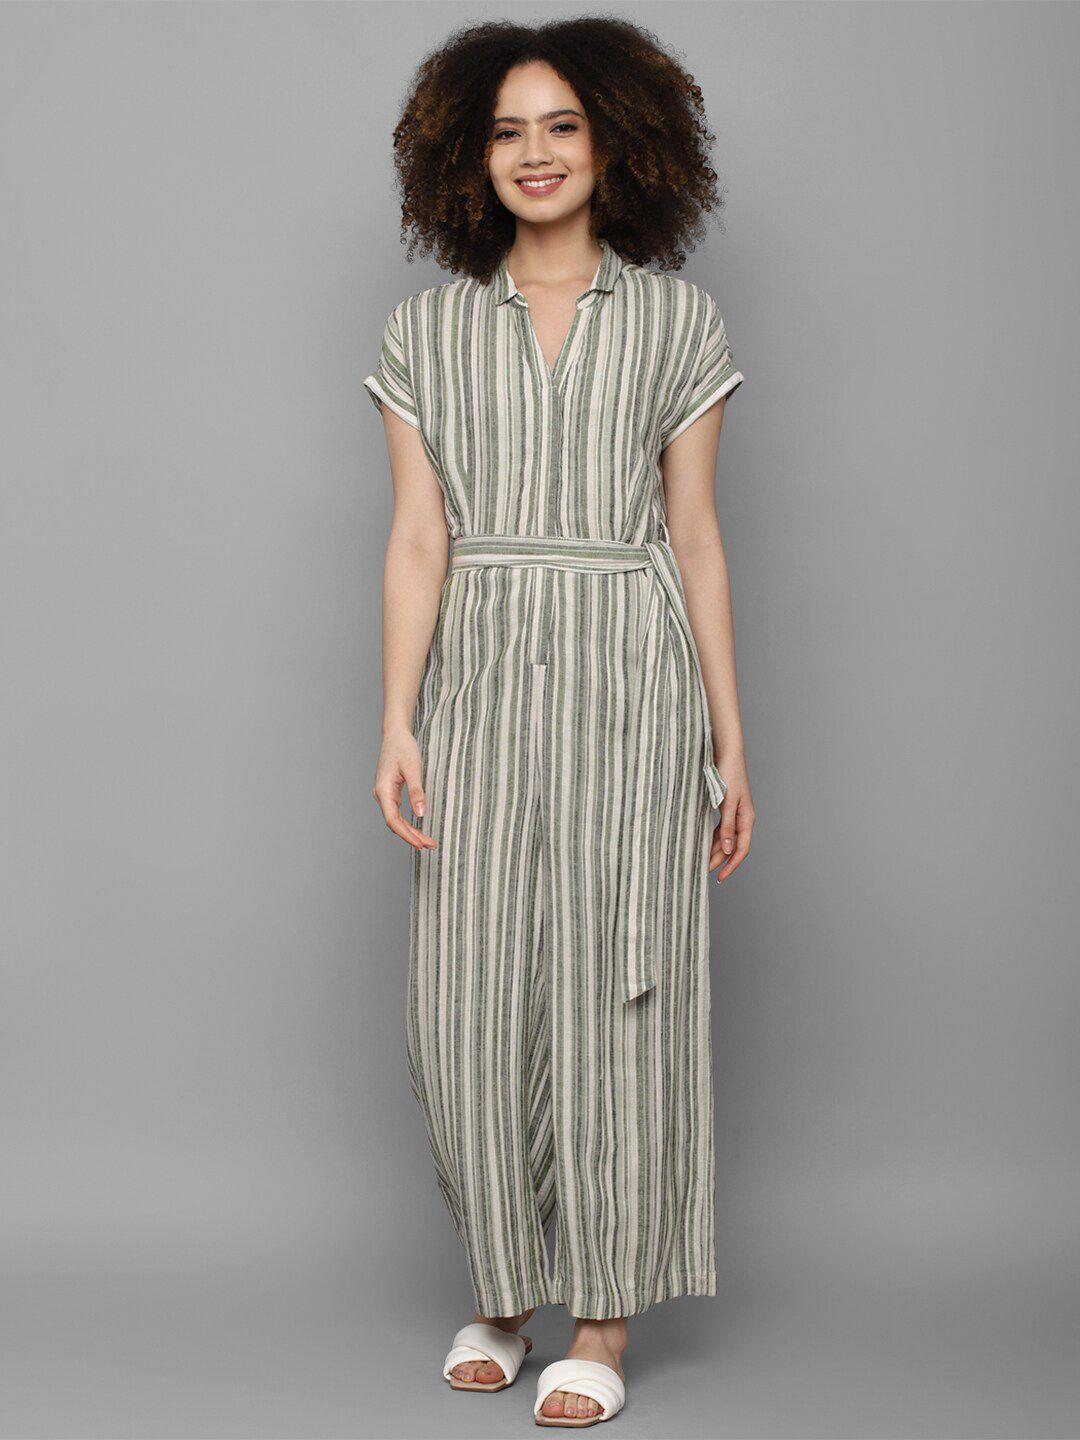 allen-solly-woman-olive-green-&-white-linen-striped-basic-jumpsuit